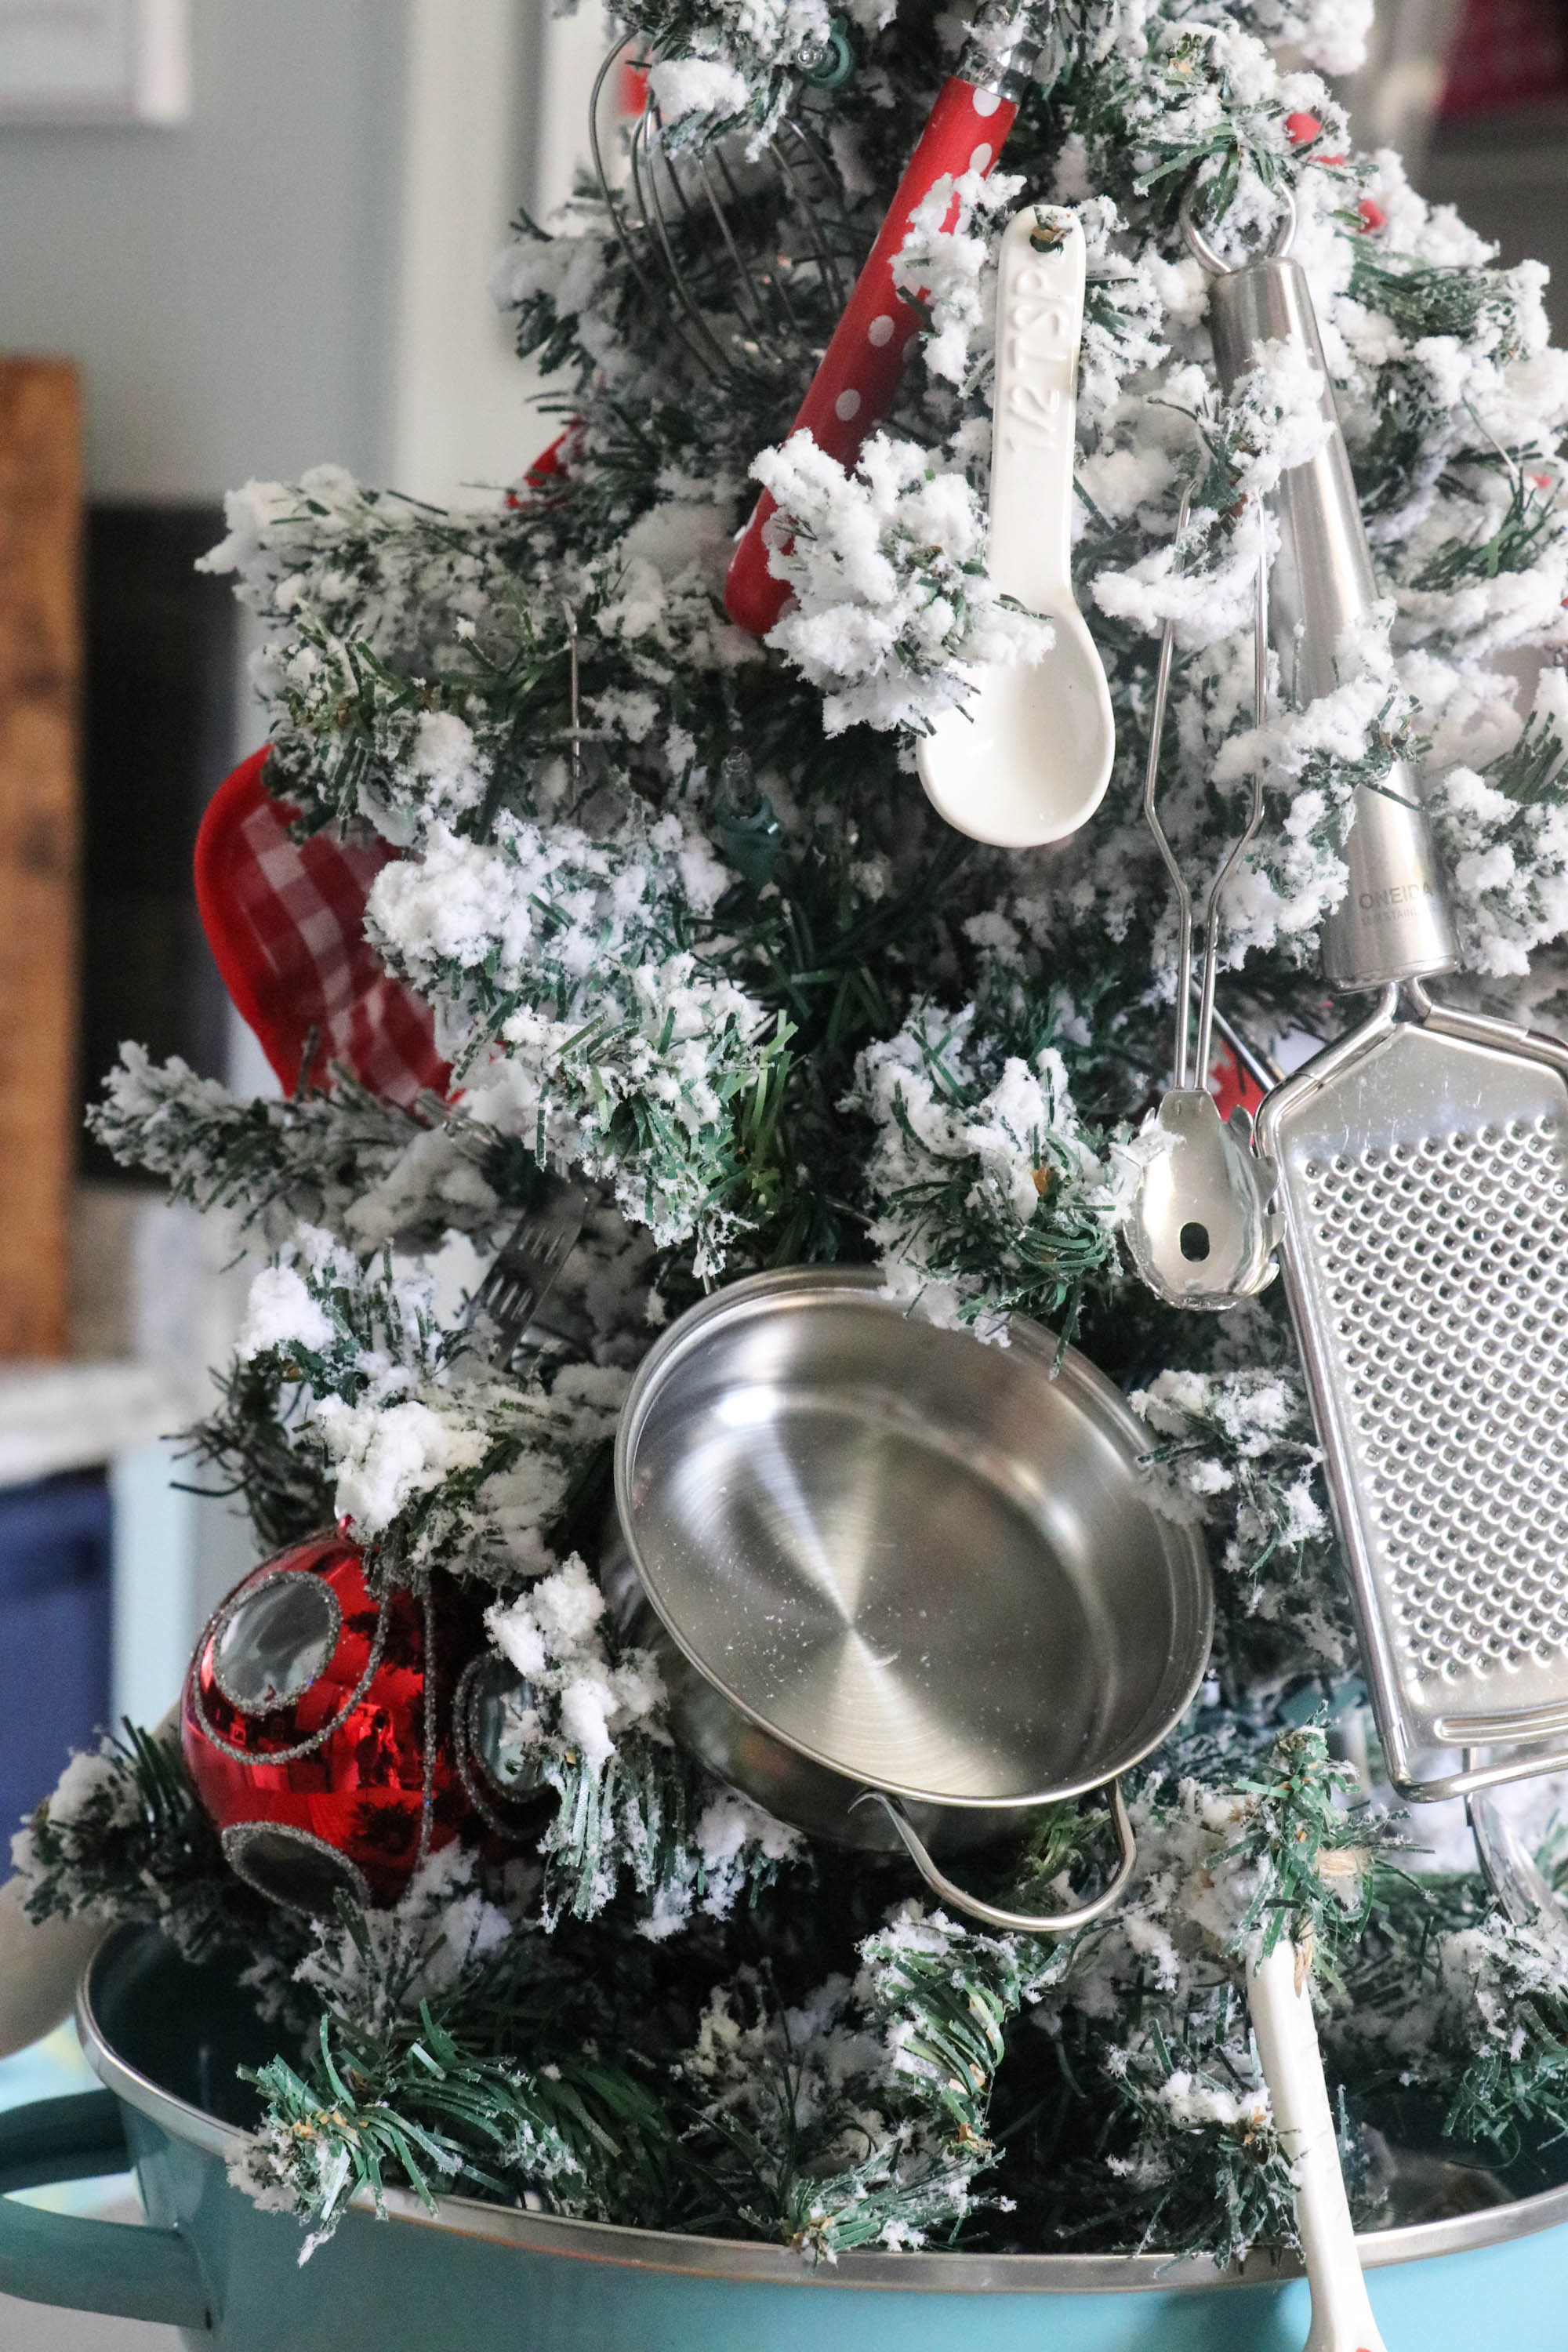 Kitchen Christmas Tree - Re-Fabbed